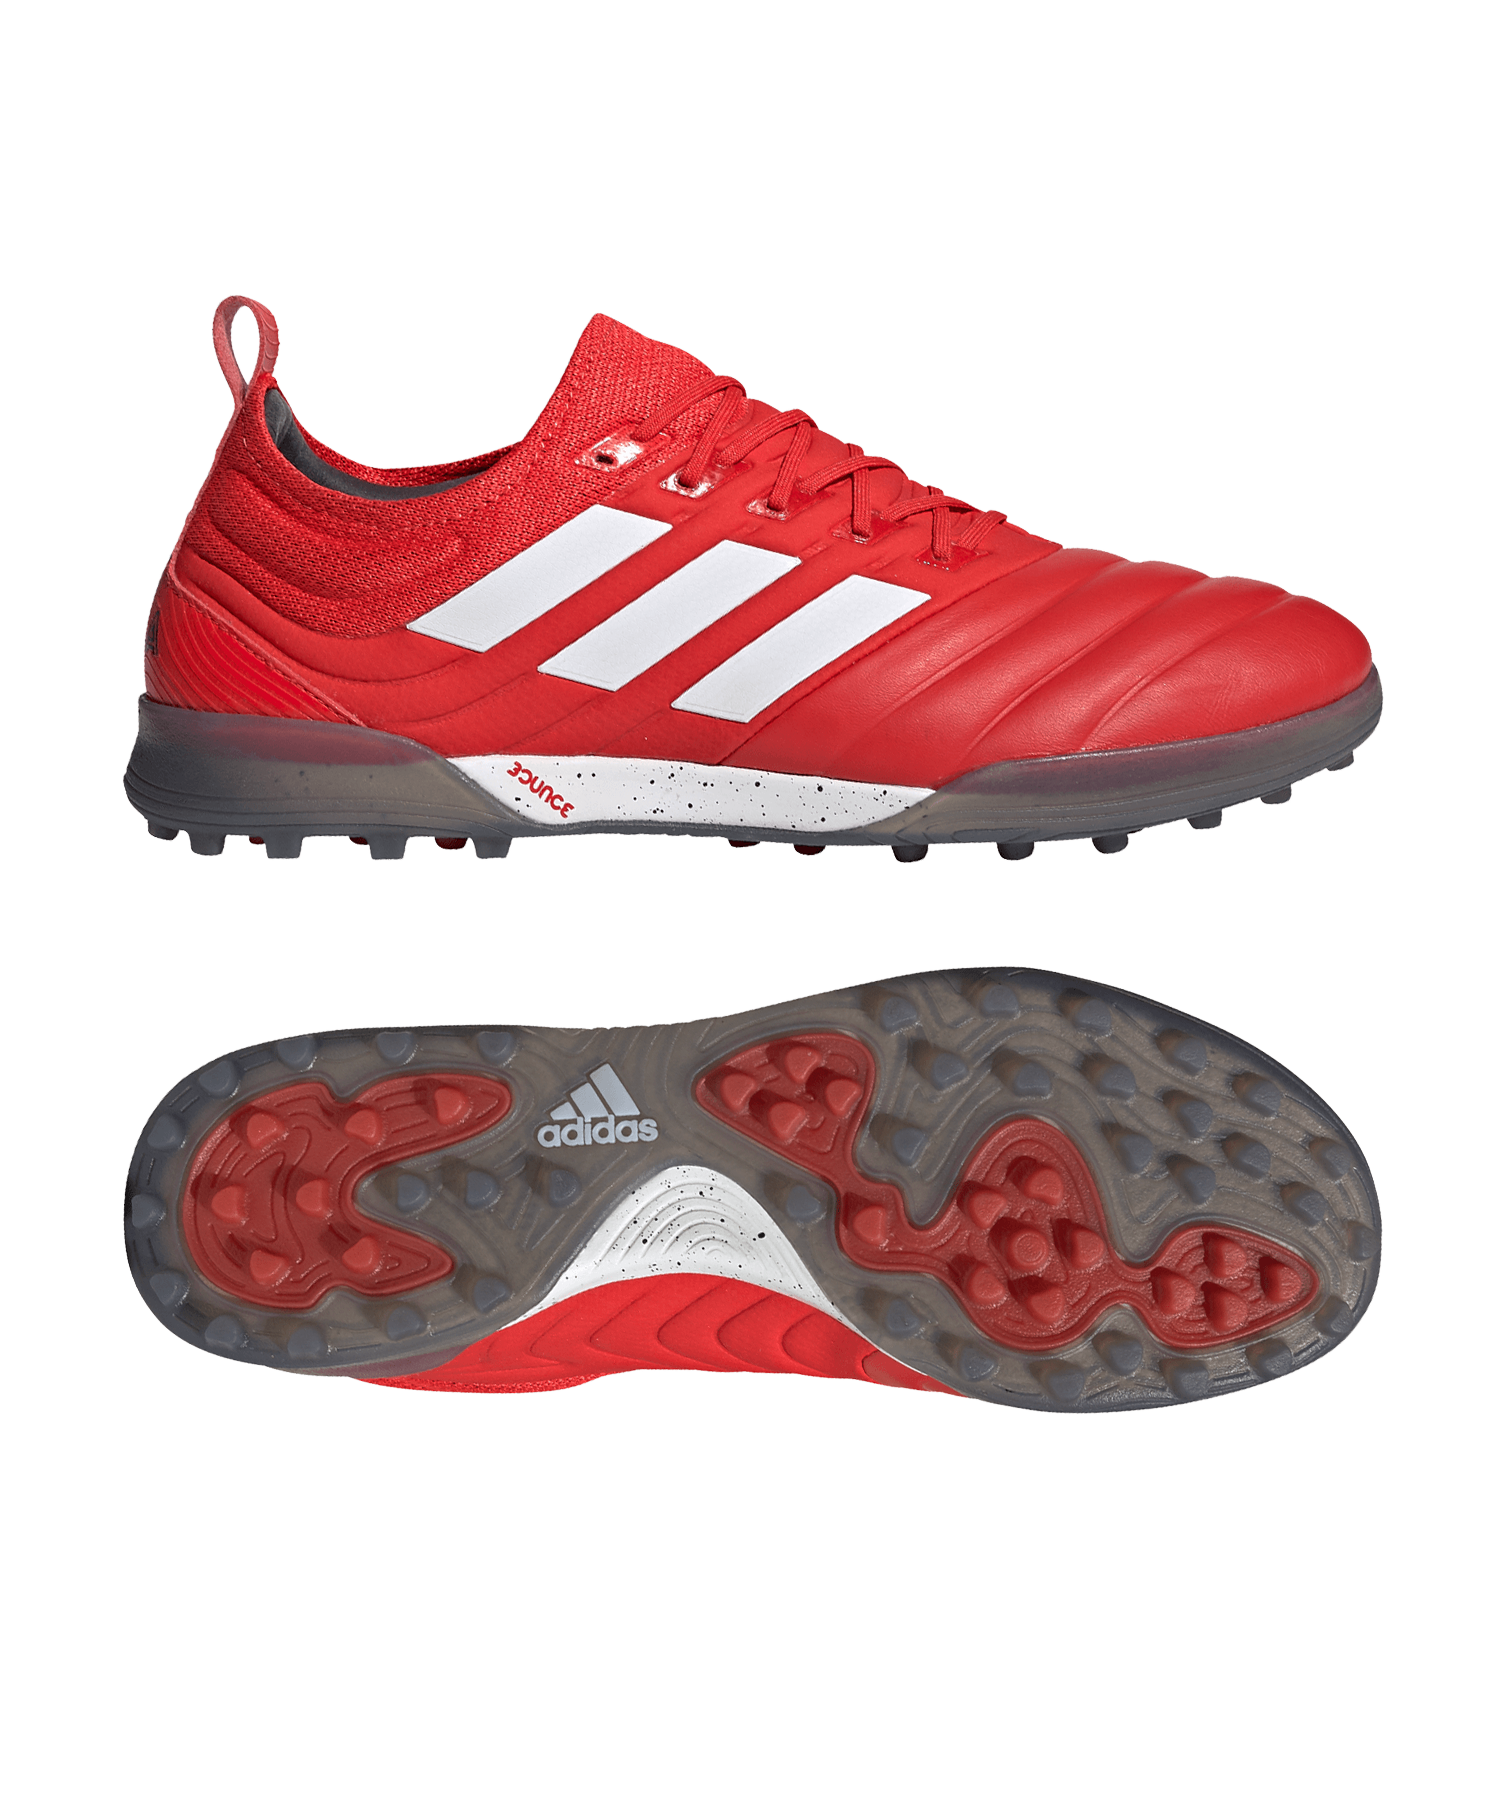 Surrounded double fuse adidas COPA Mutator 20.1 TF - Red